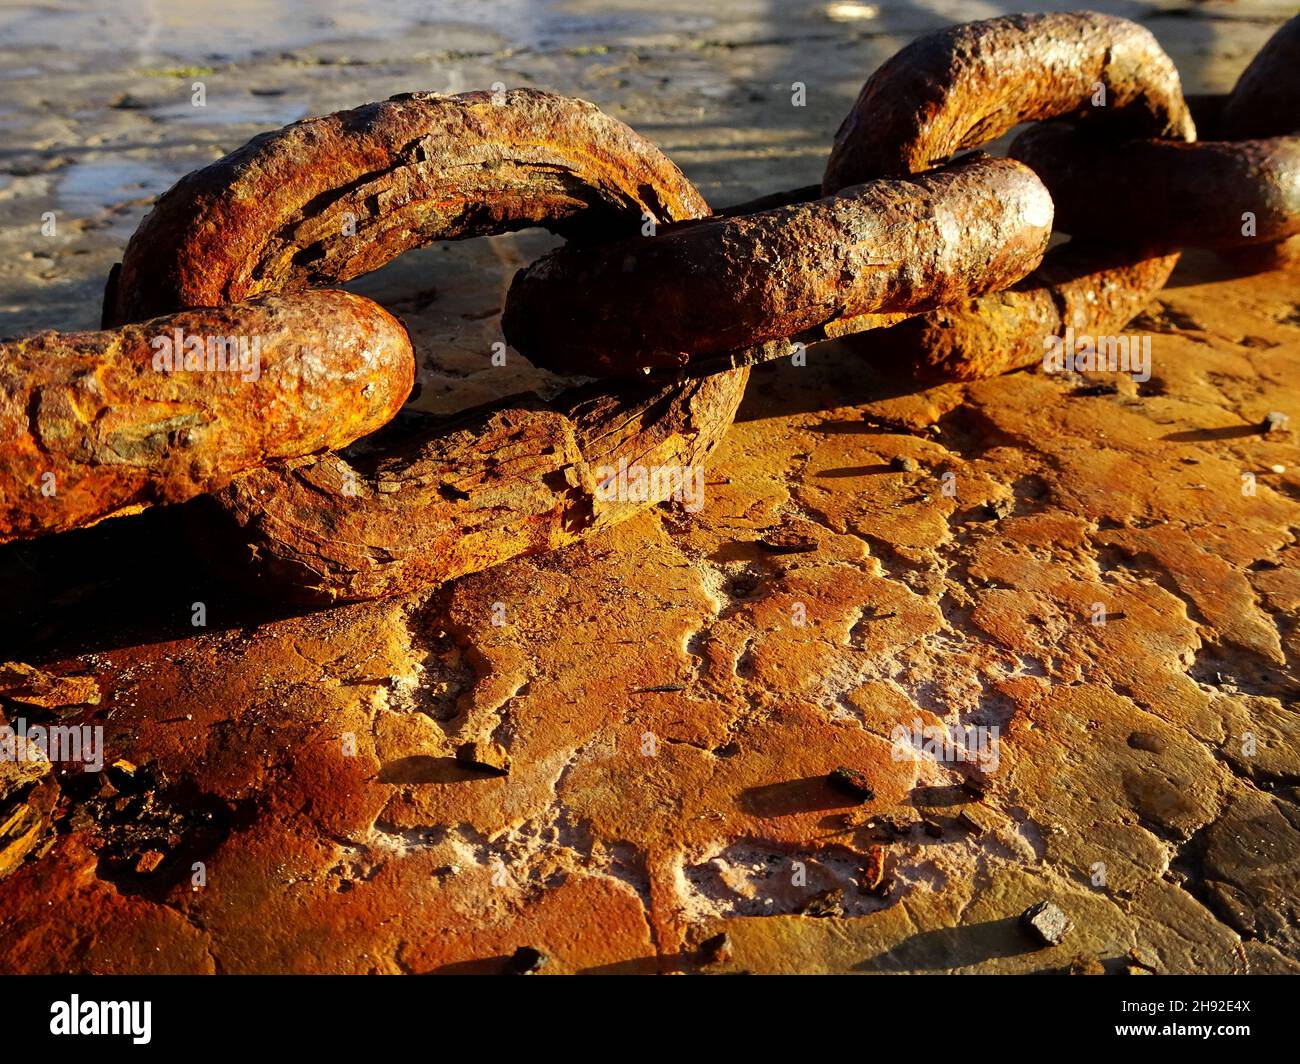 Rusty chain links on concrete Stock Photo